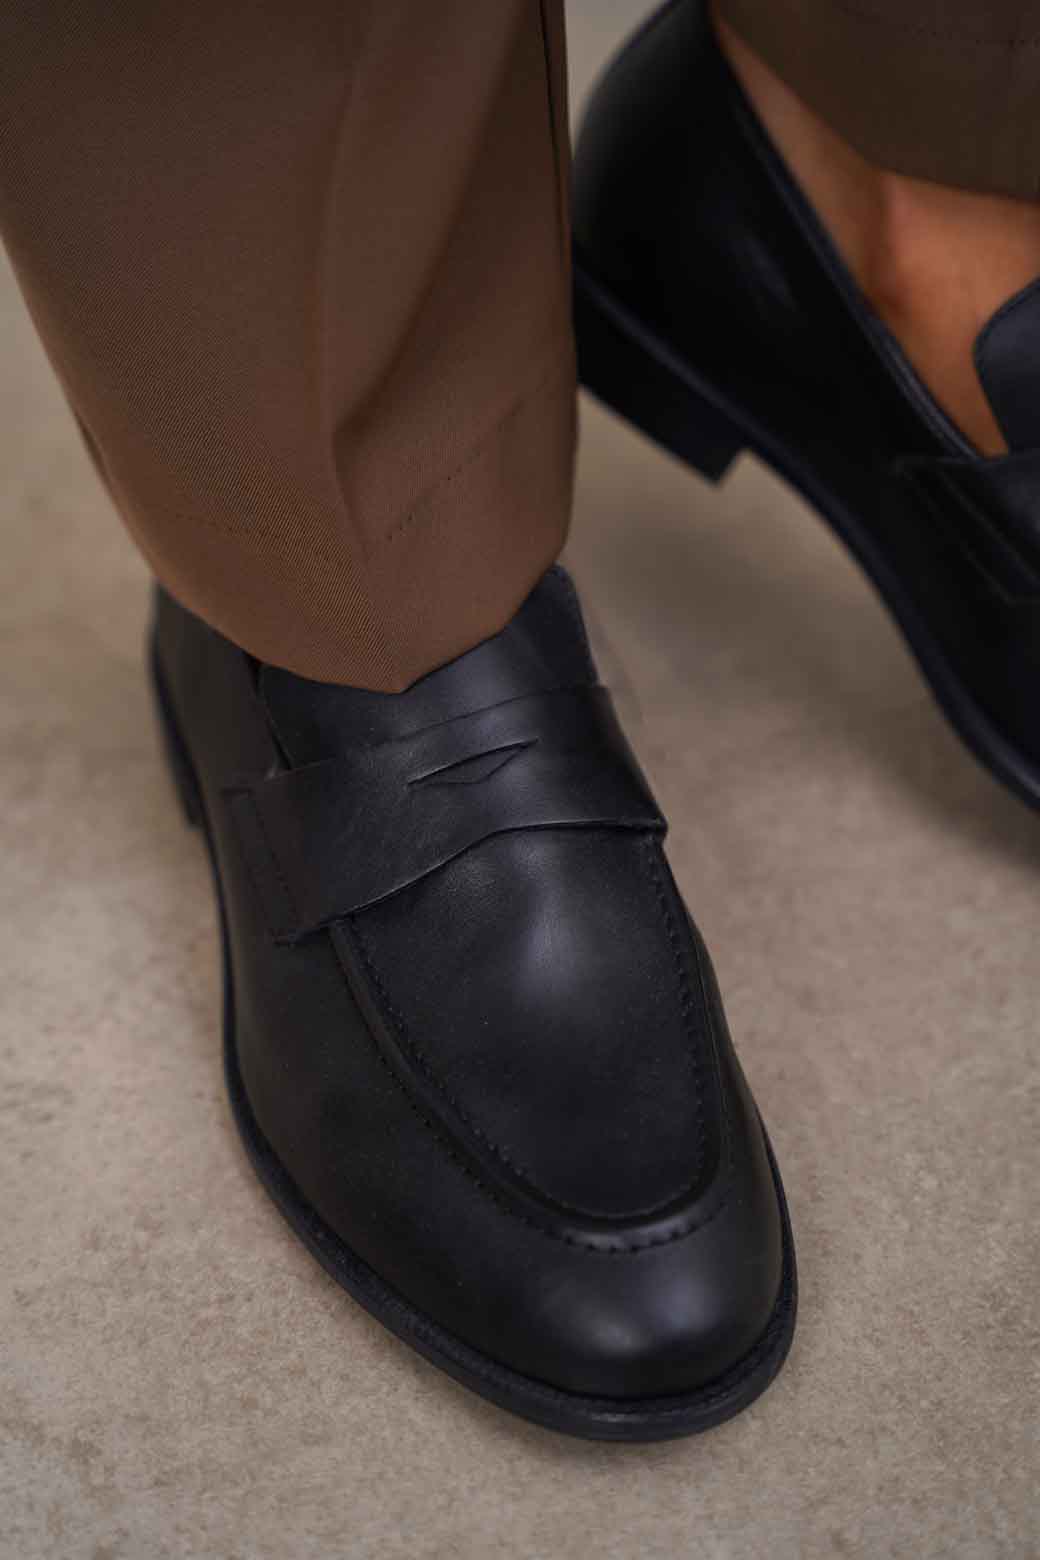 BLACK CLASSIC LEATHER LOAFERS